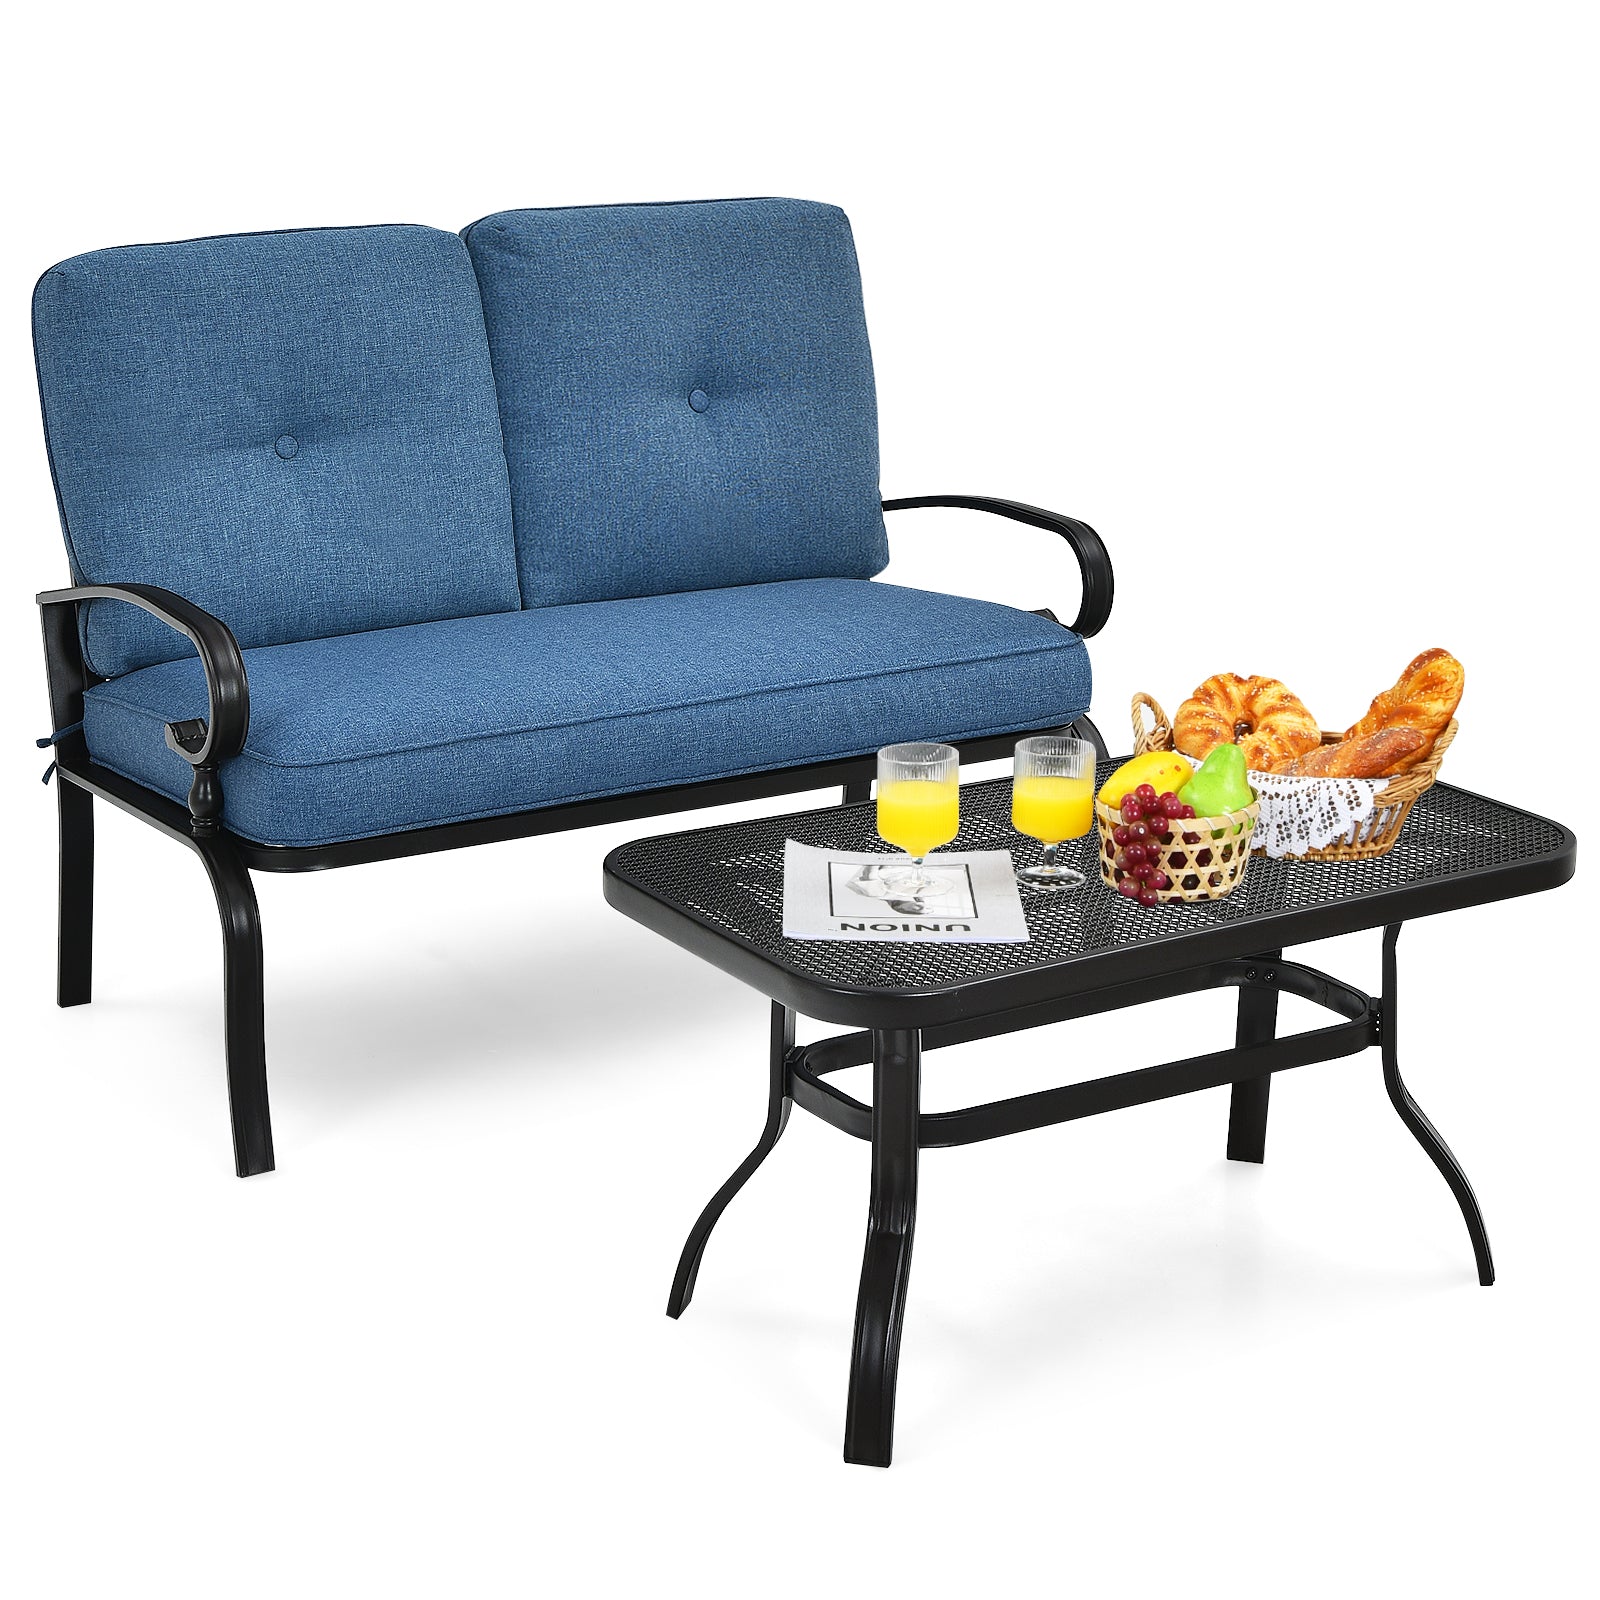 Garden Furniture Set with 2 Seat Cushioned Sofa and Coffee Table-Navy